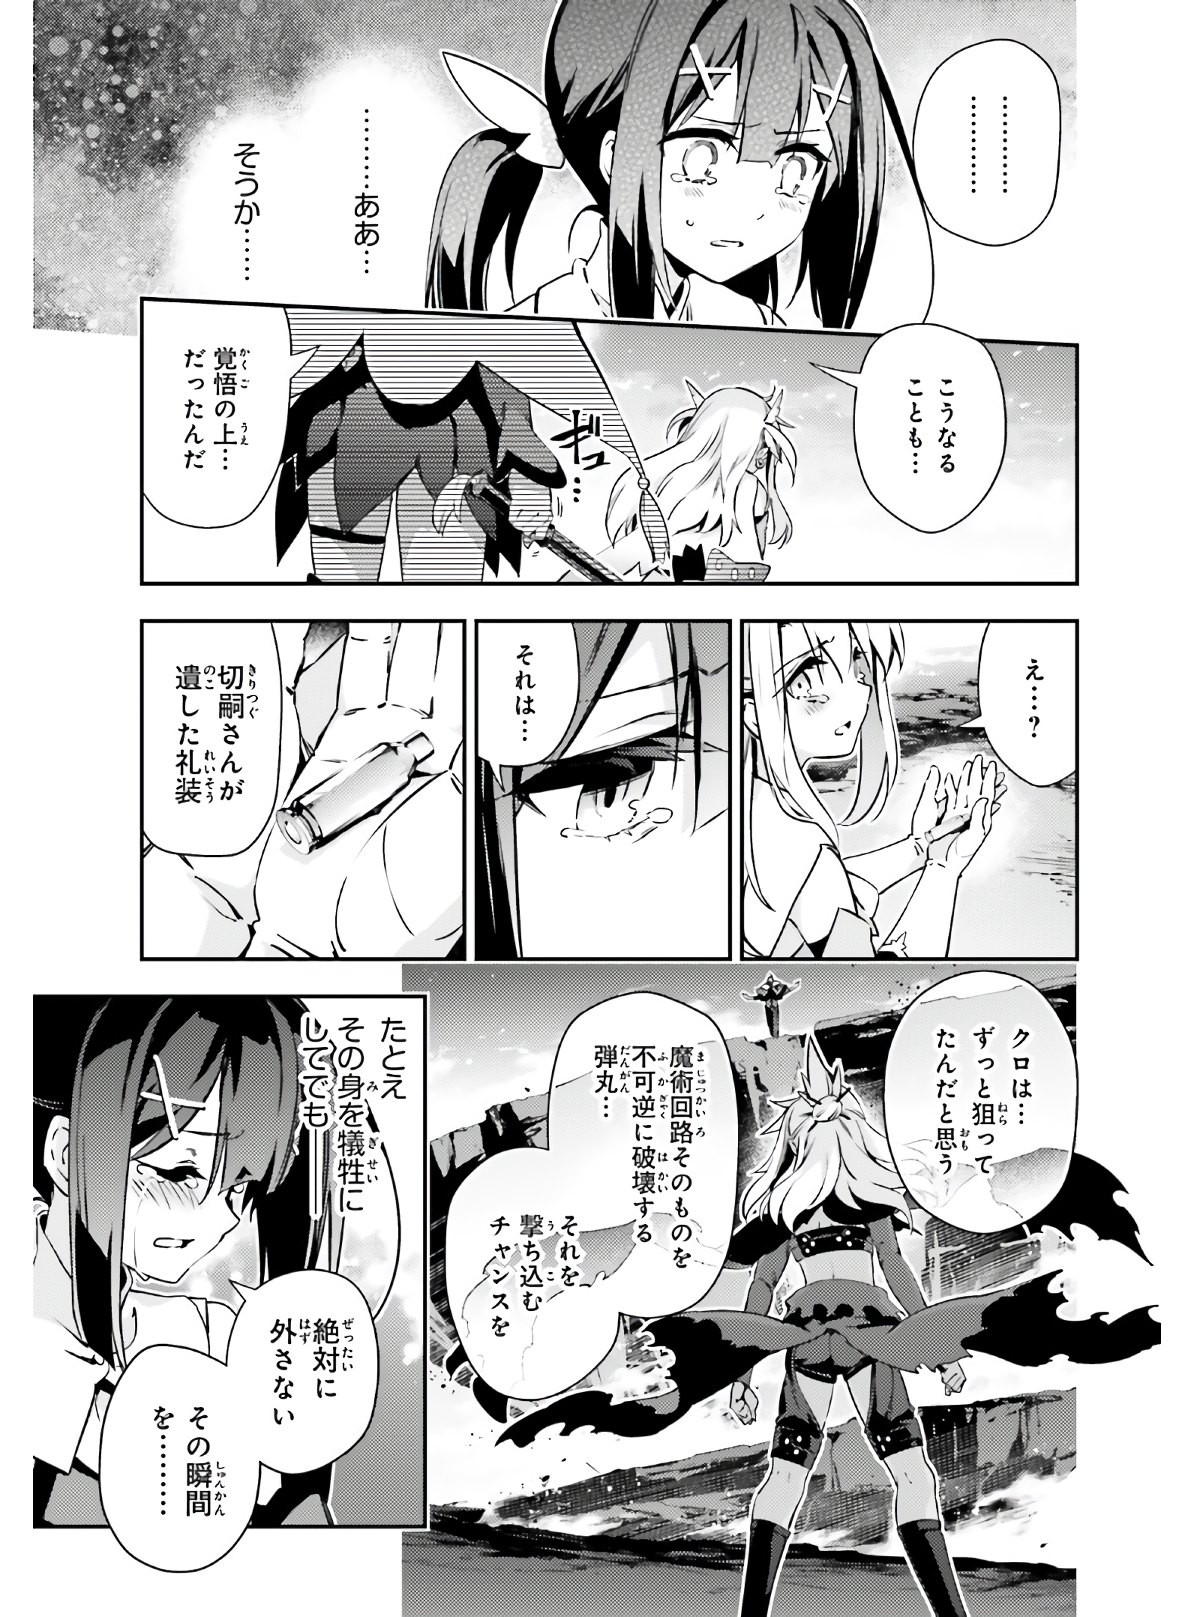 Fate/Kaleid Liner Prisma Illya Drei! - Chapter 60 - Page 3